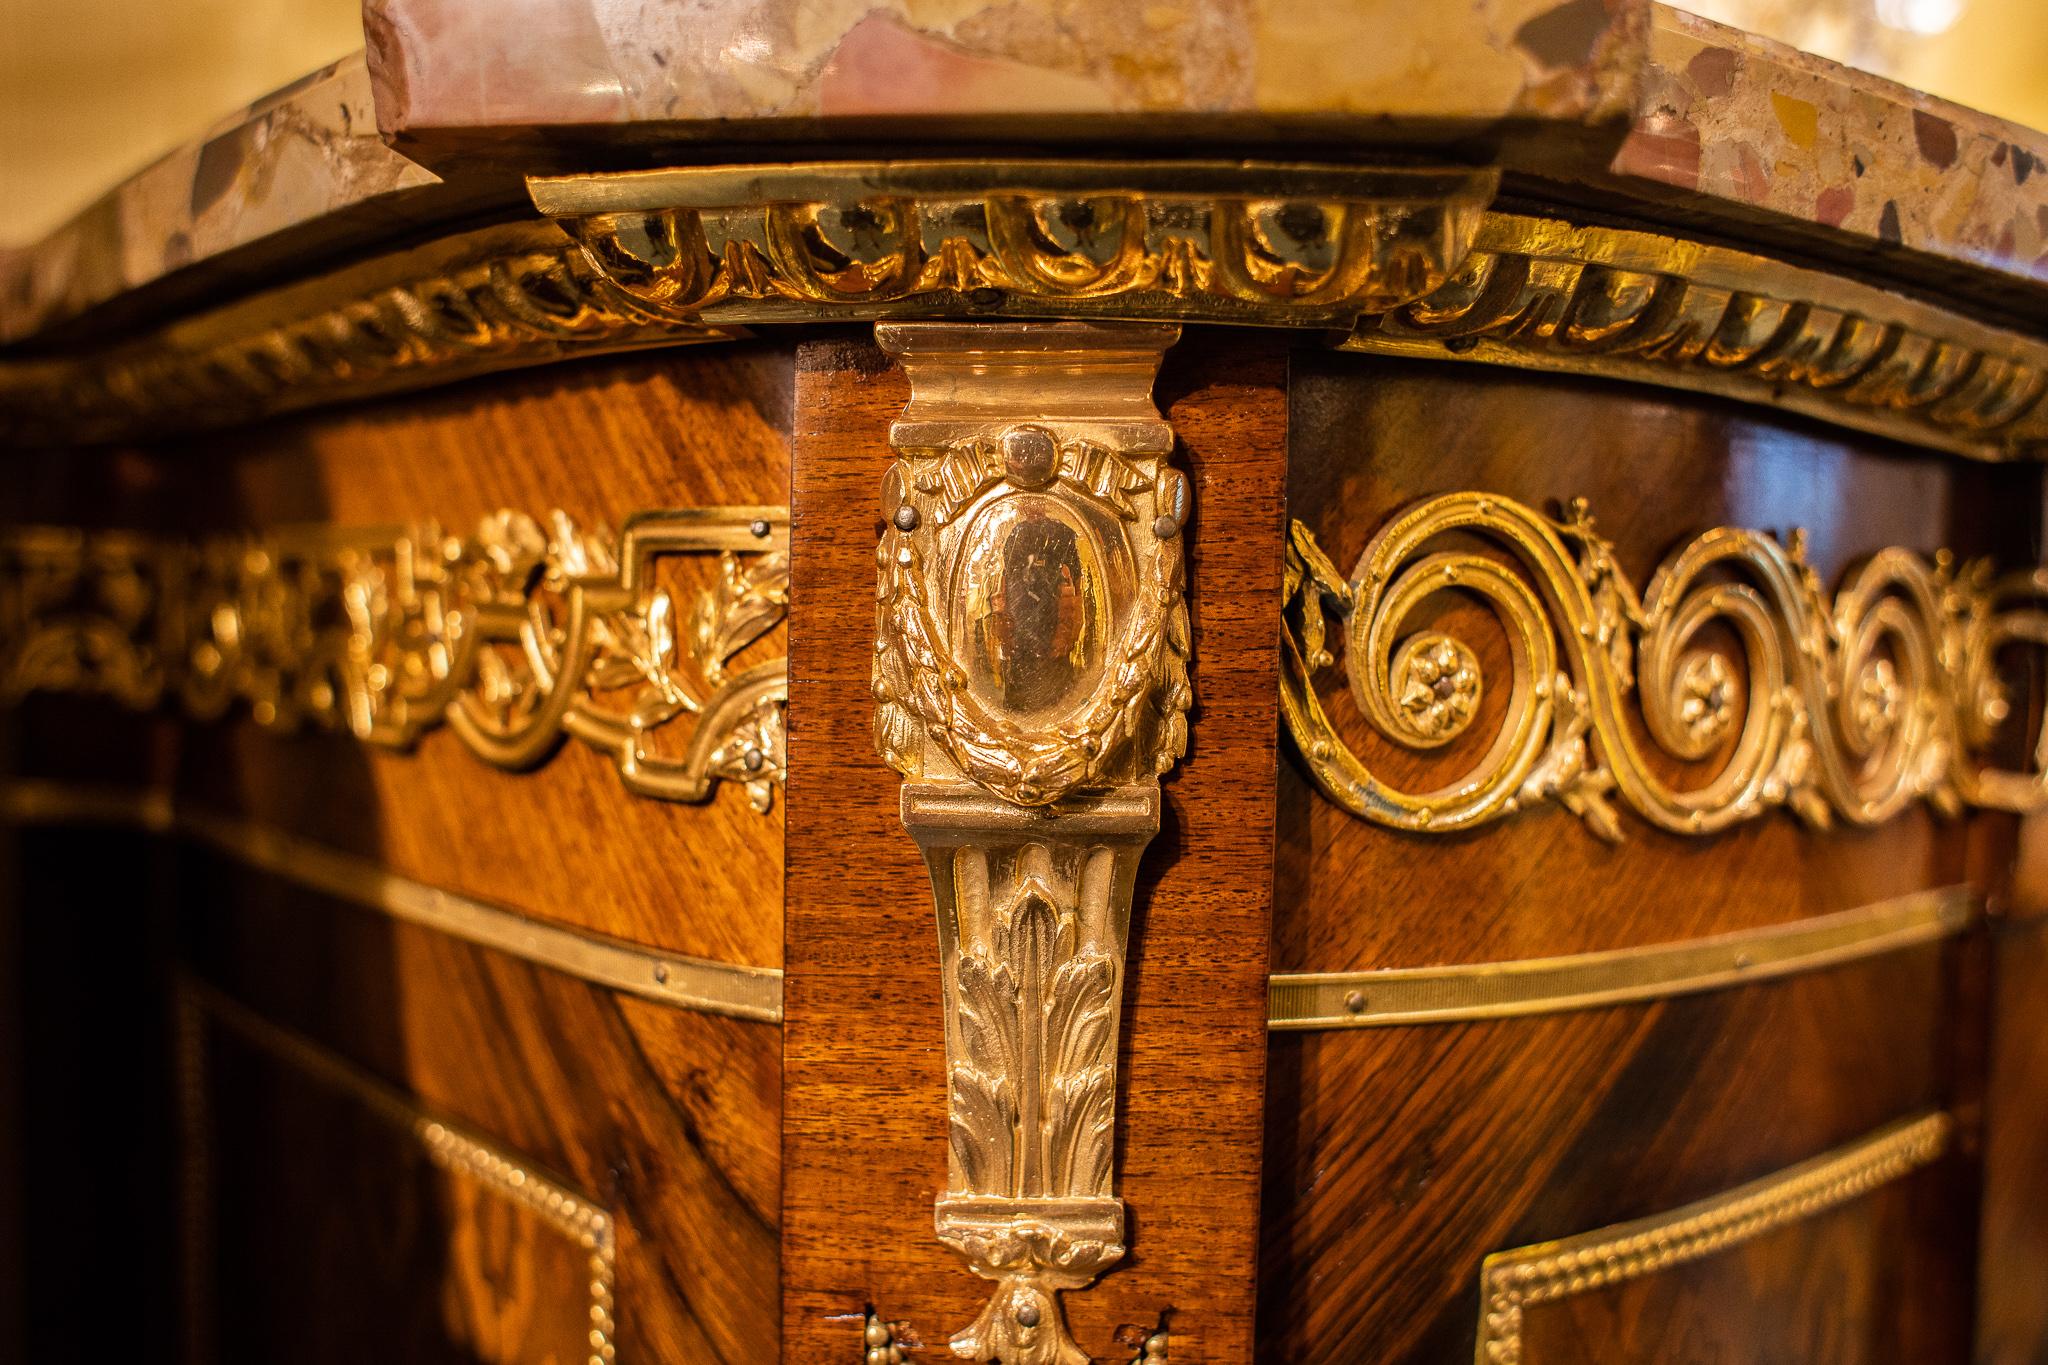 A fine very quality tall French Louis XVI style kingwood, marquetry inlaid bronze-mounted marble-top commode.  The front door inlaid with a basket of flowers.